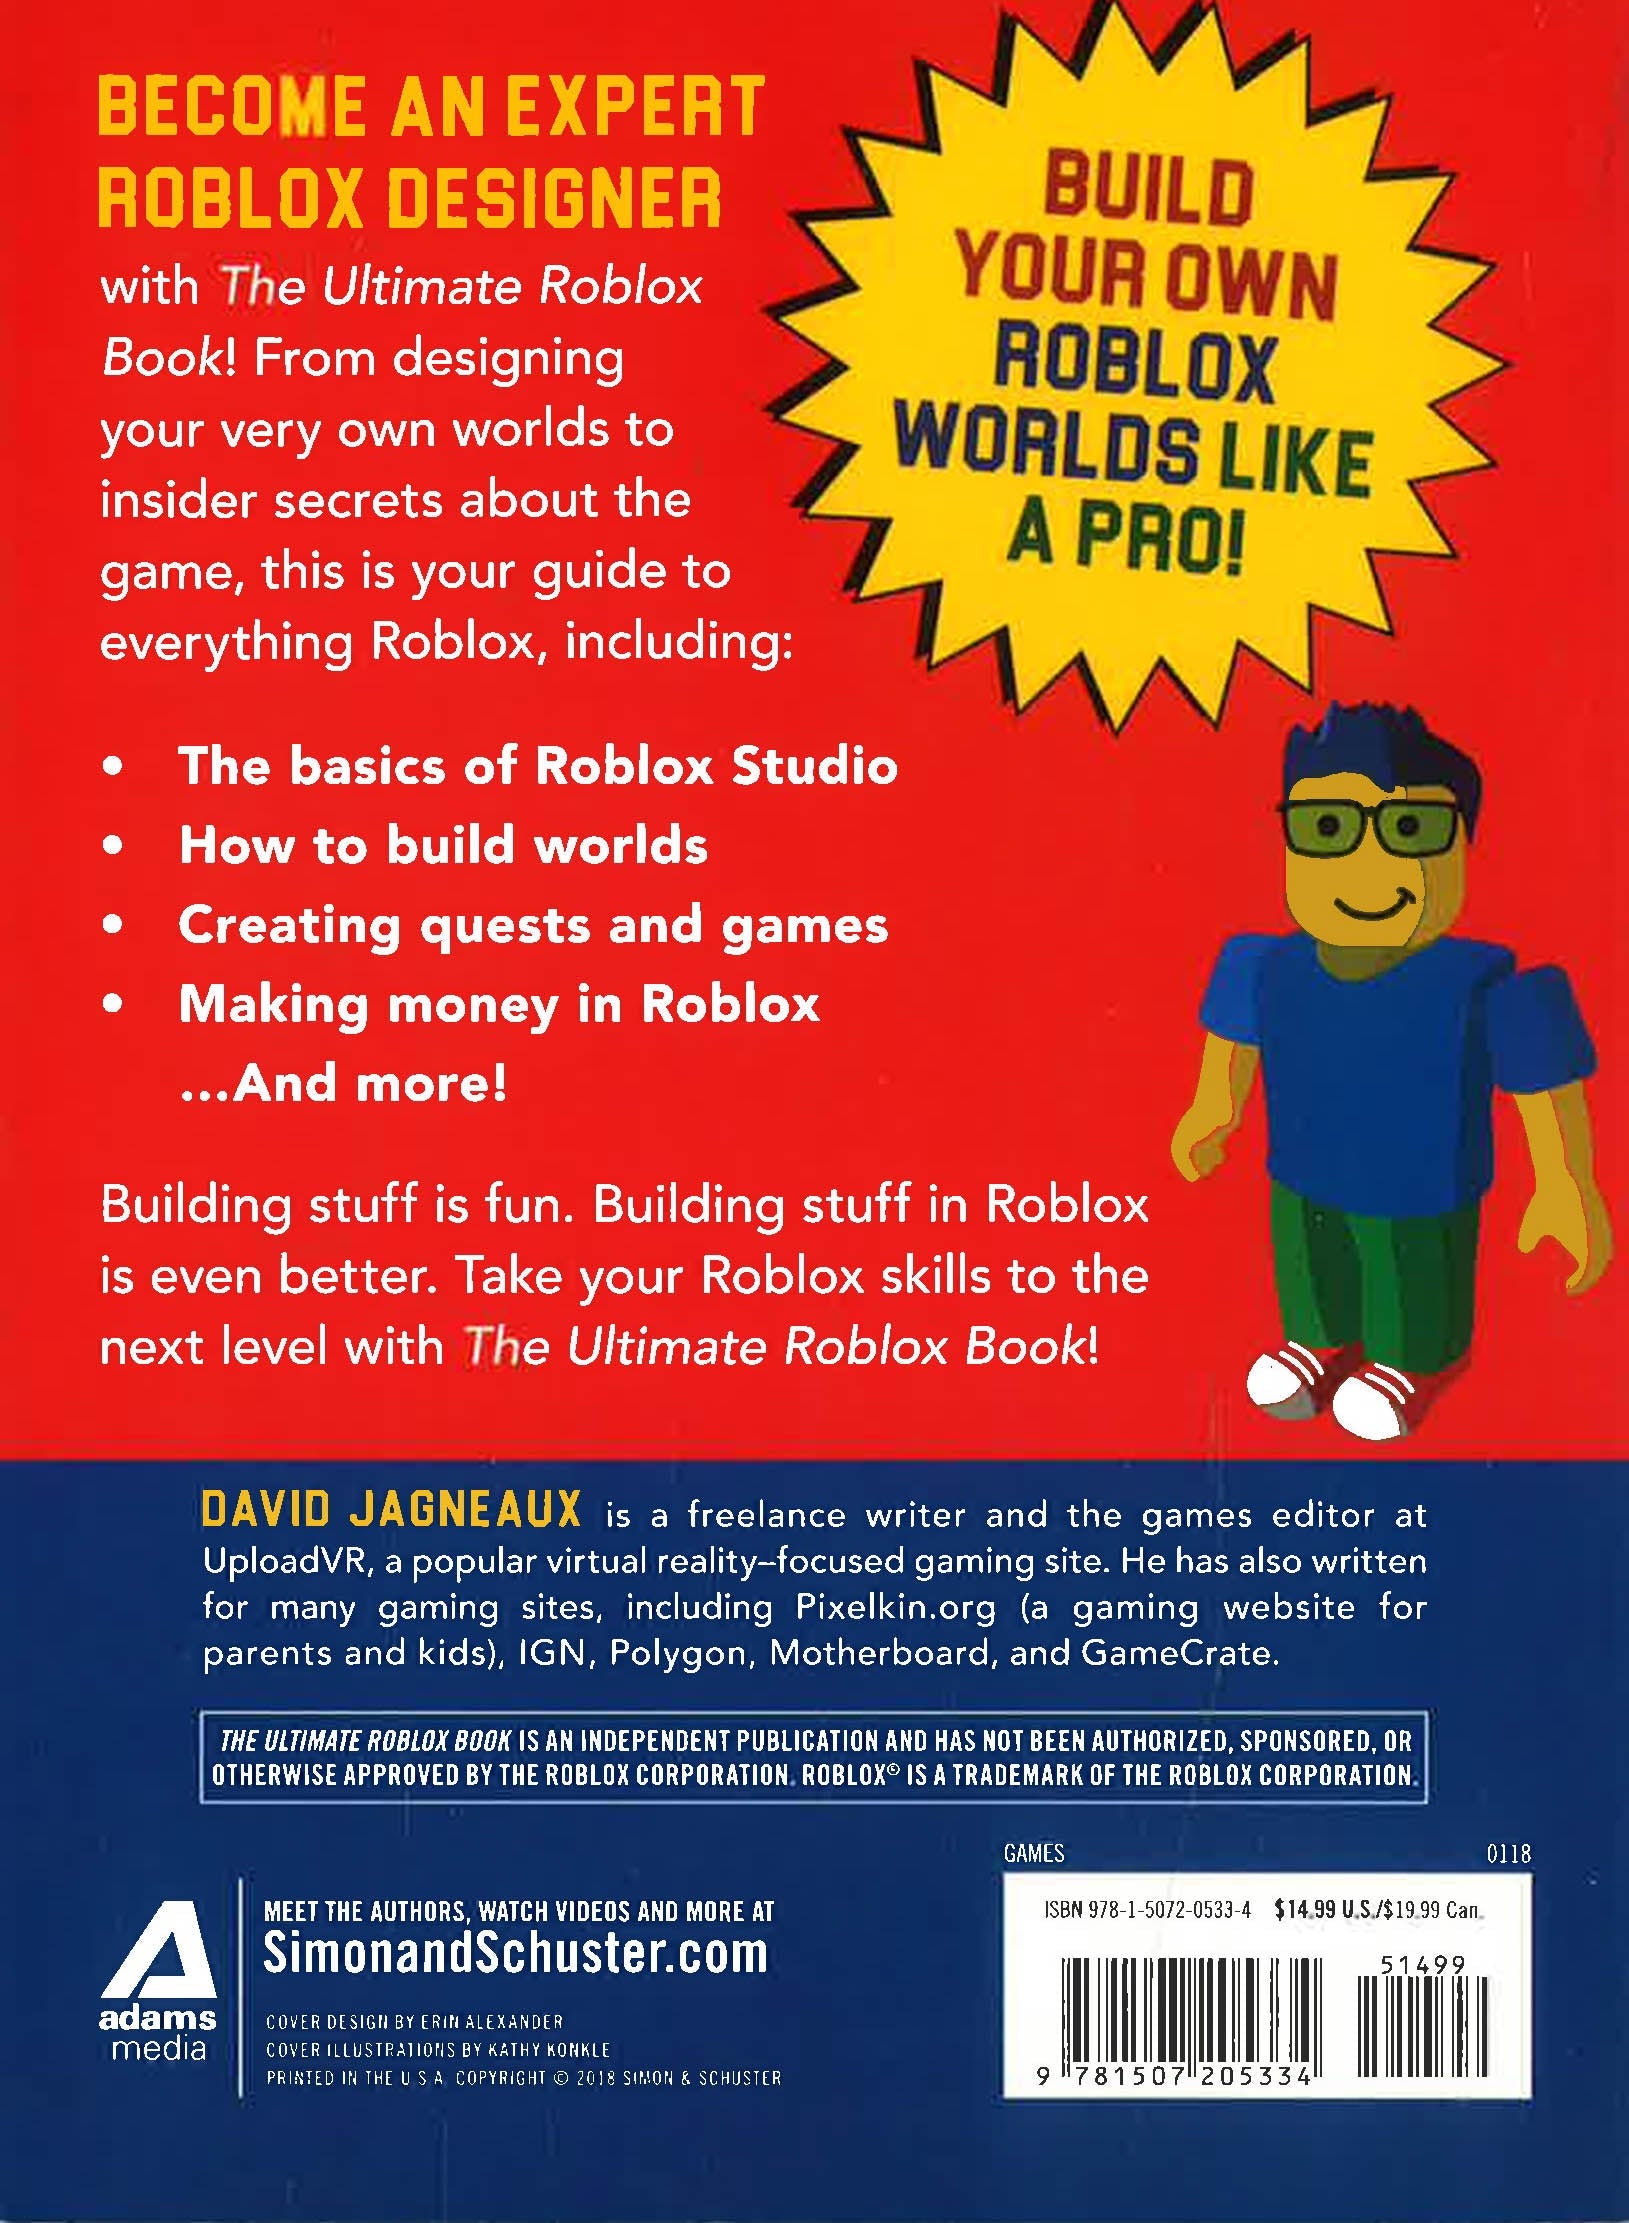 Roblox Xbox One Game Guide Unofficial on Apple Books